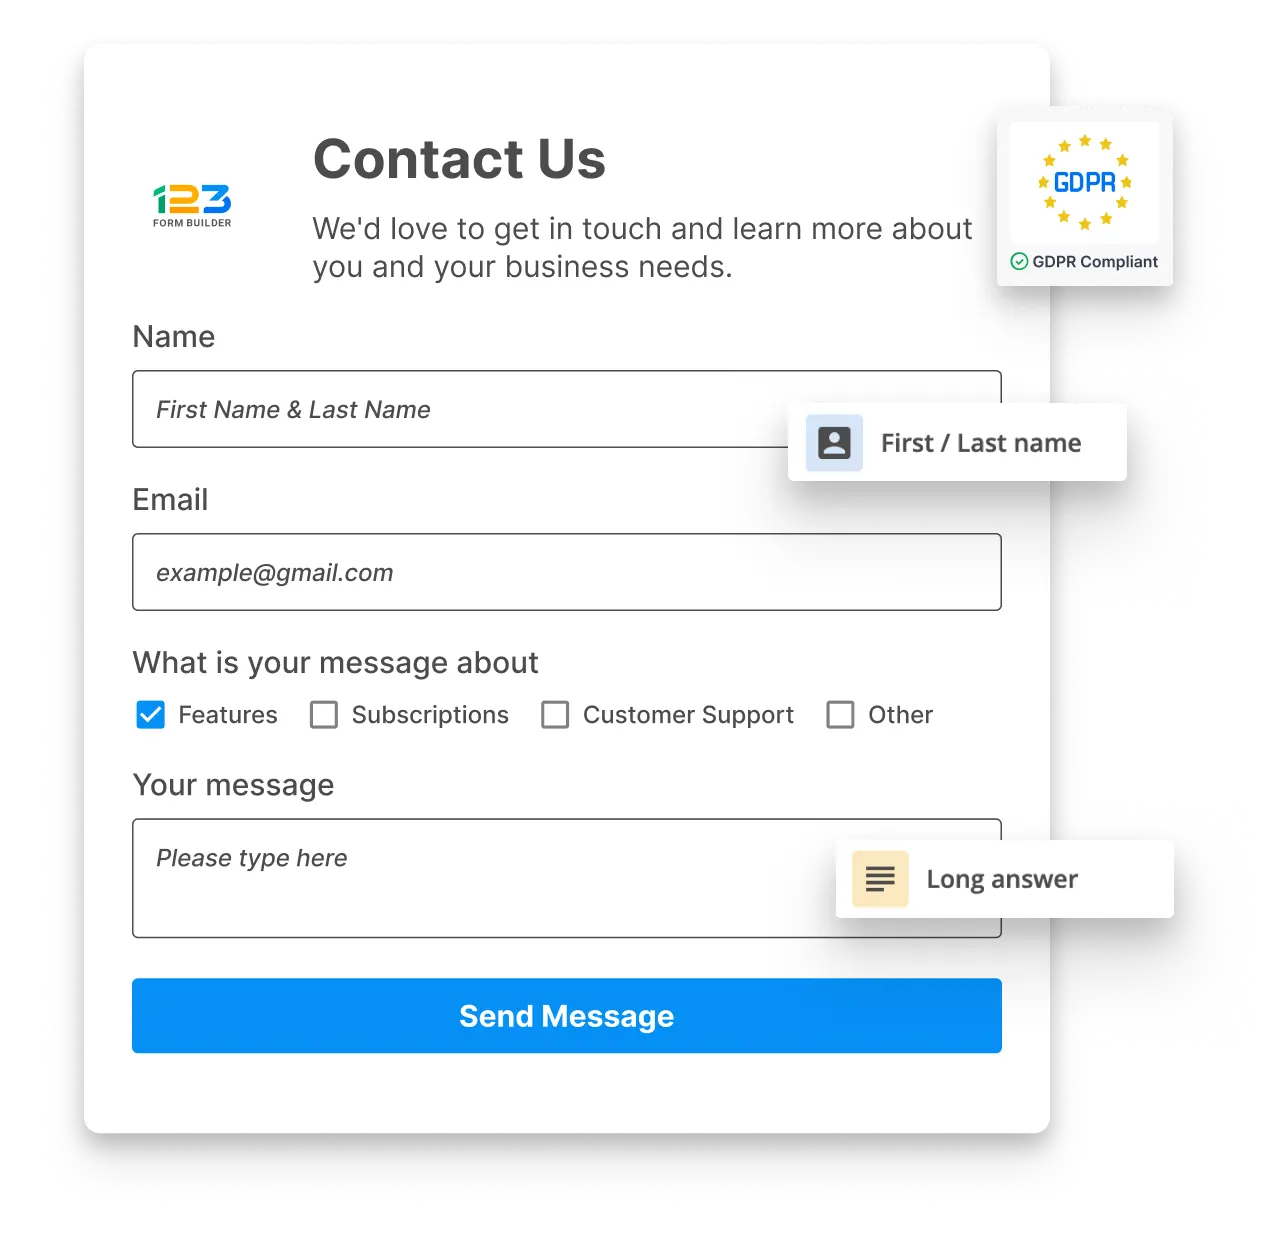 Image showing a GDPR compliant contact us form